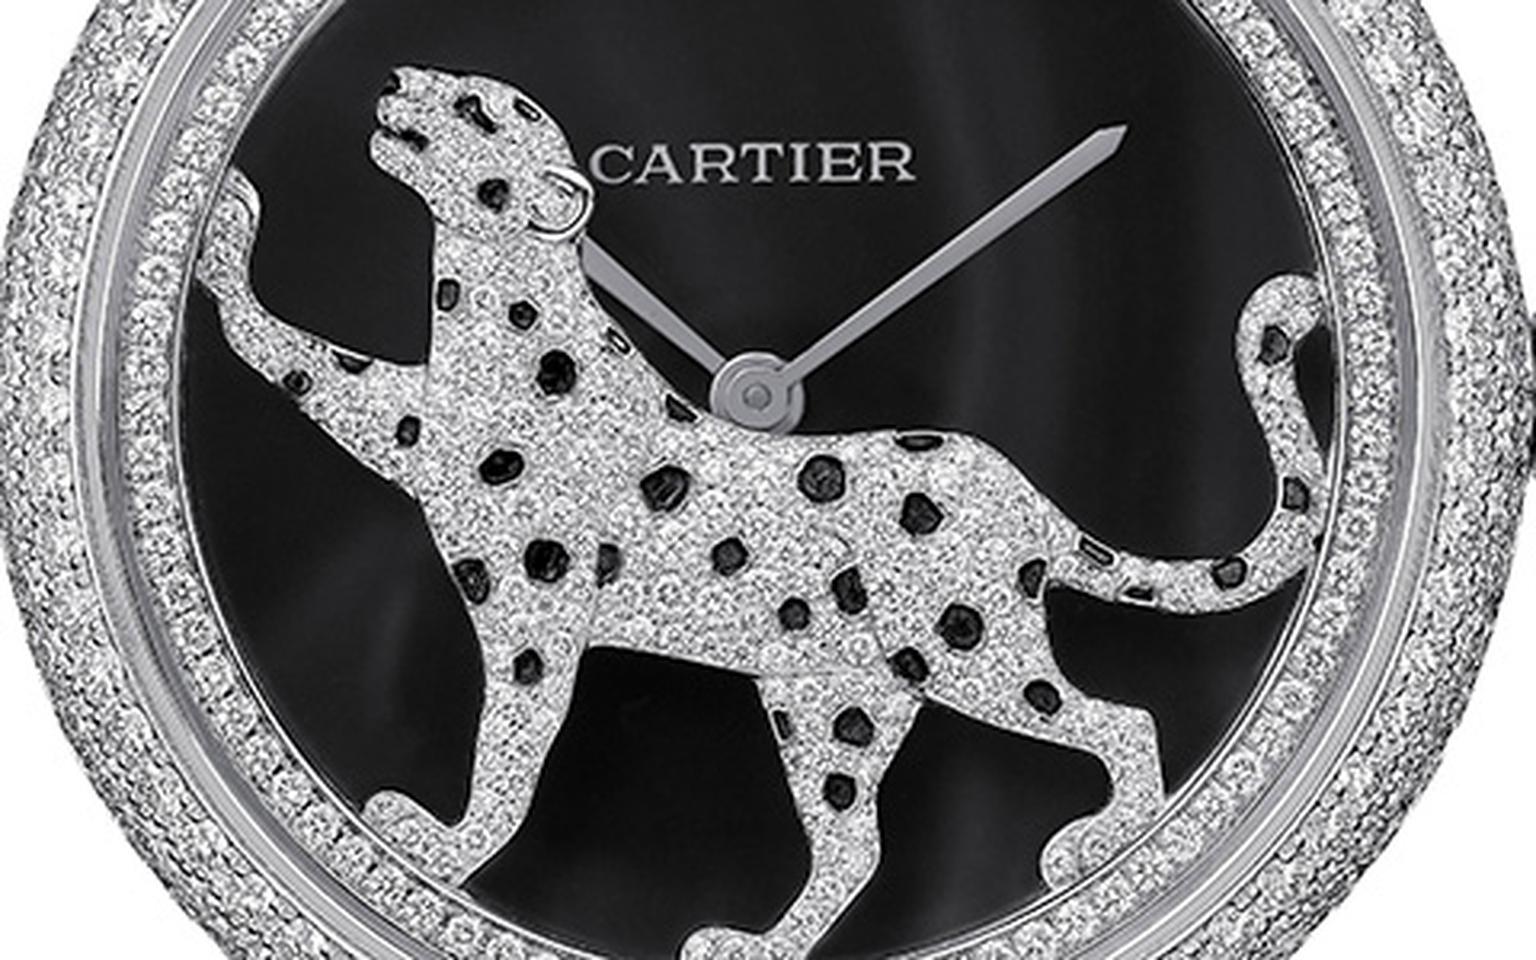 SIHH 2012 Cartier Panthere high jewellery watch Dial detail